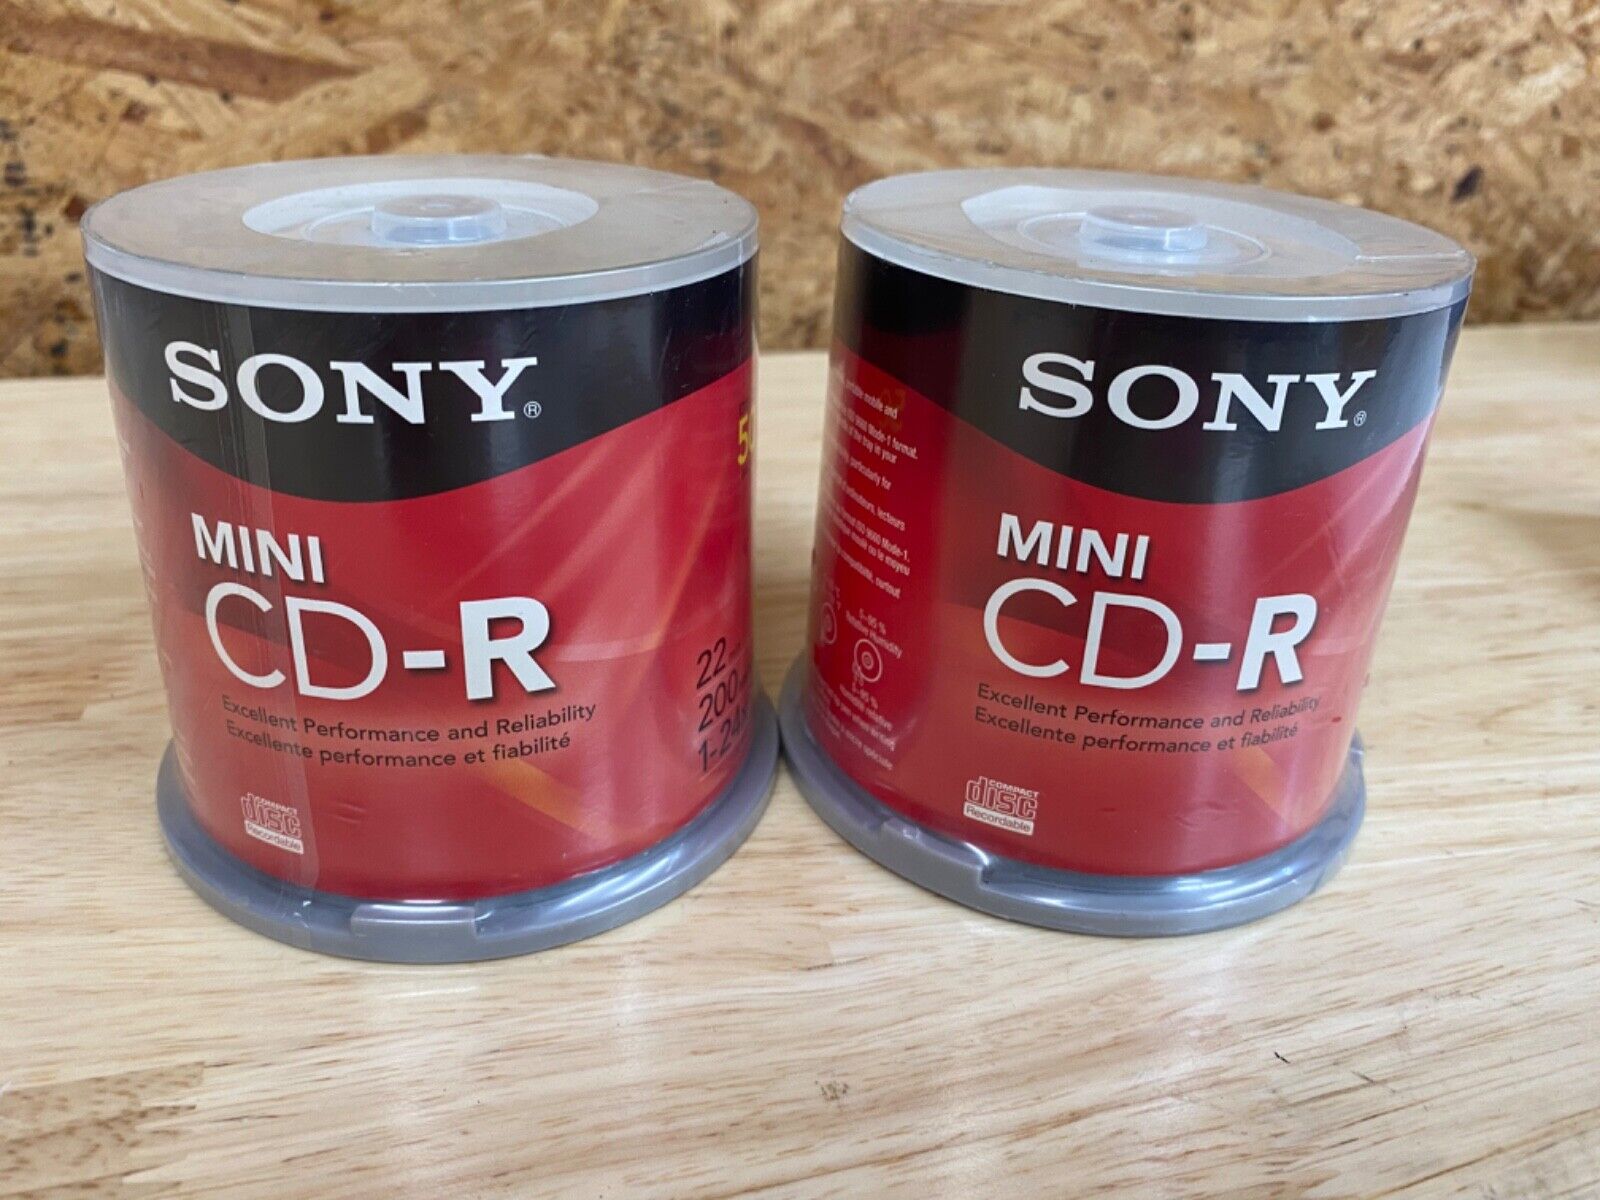 Sony Mini CD-R 200 MB 22 Minute 50 Disc Spindle